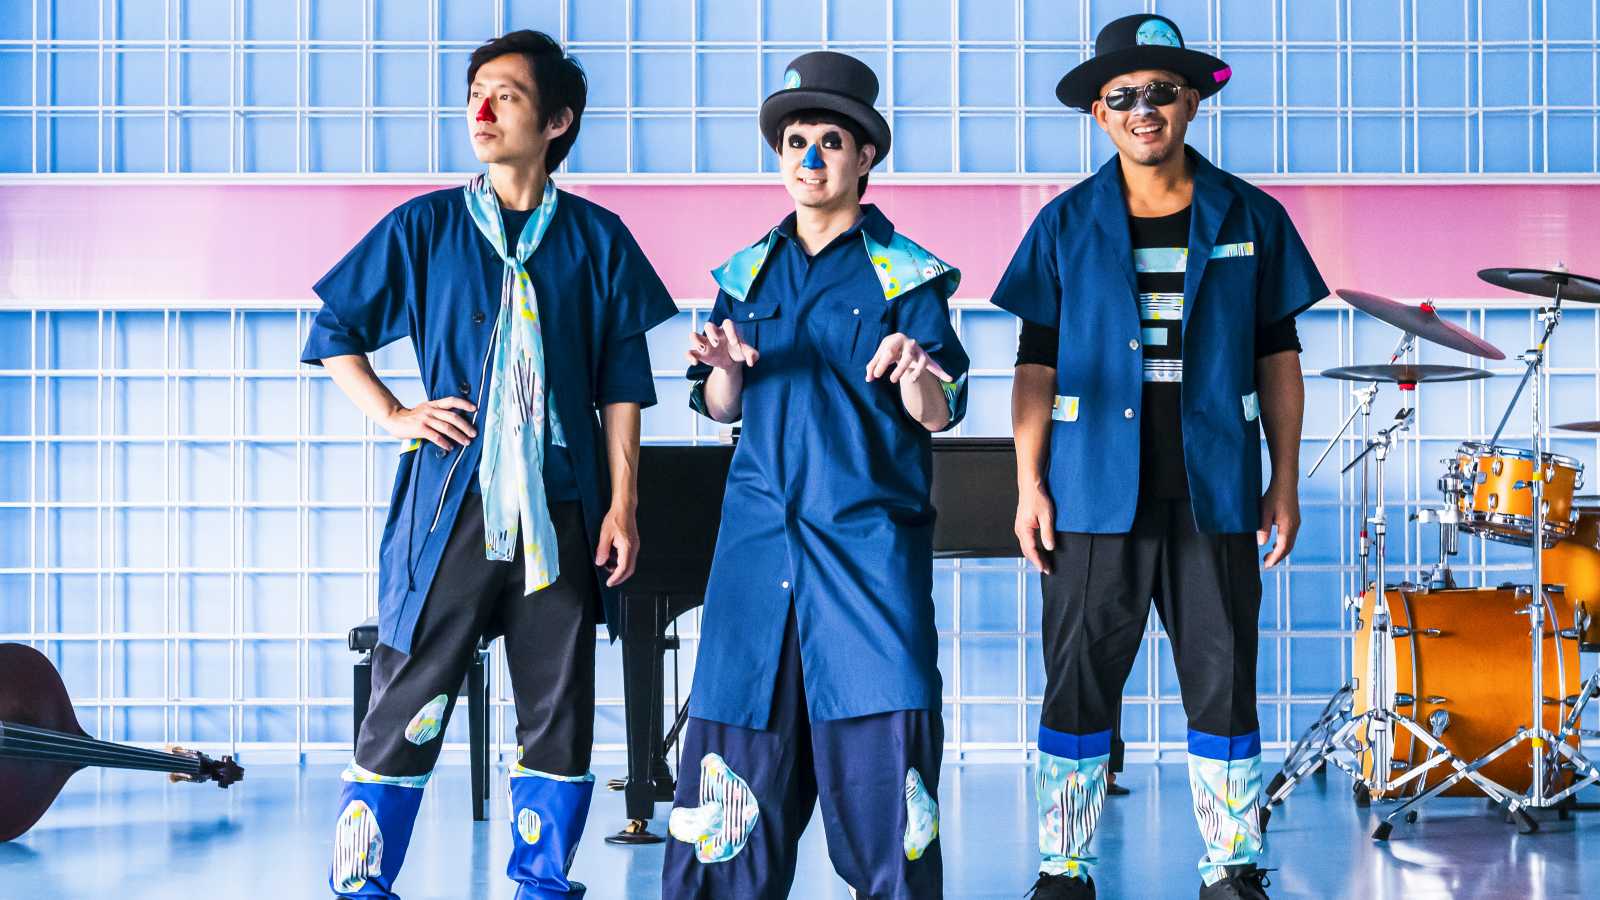 H ZETTRIO to Live Stream Three Shows on YouTube © World Apart Co., Ltd. All rights reserved.